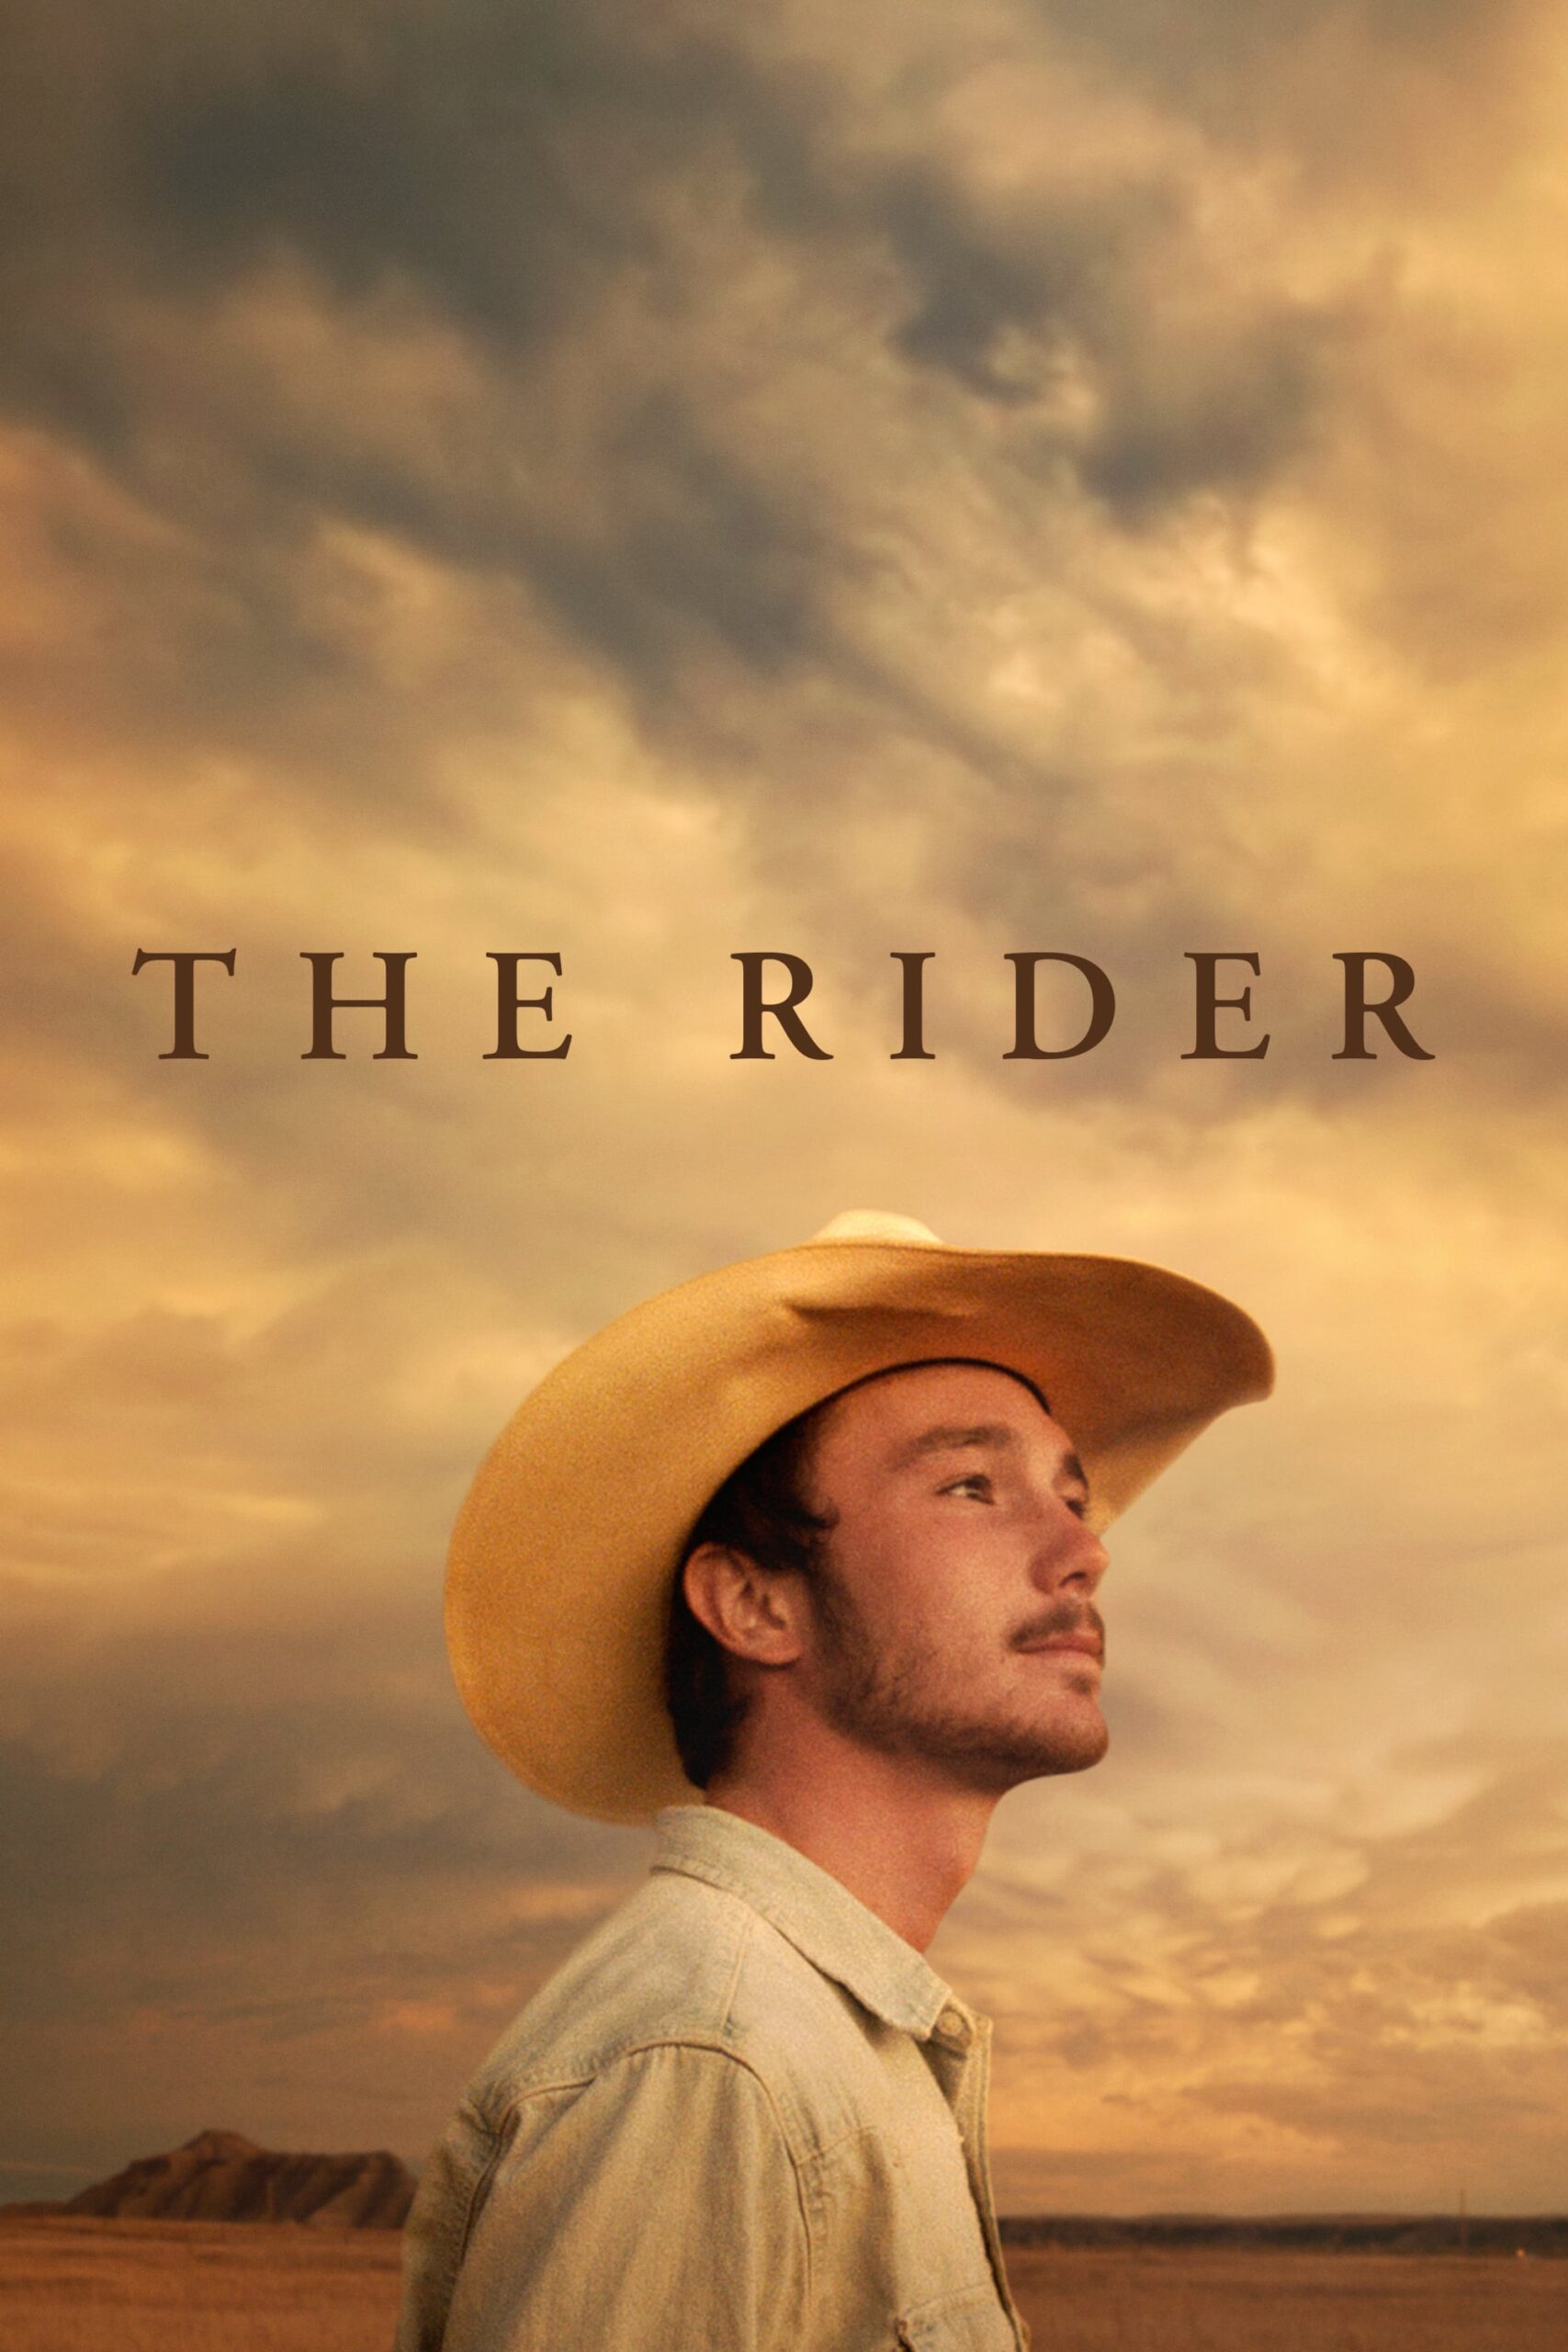 Poster for the movie "The Rider"